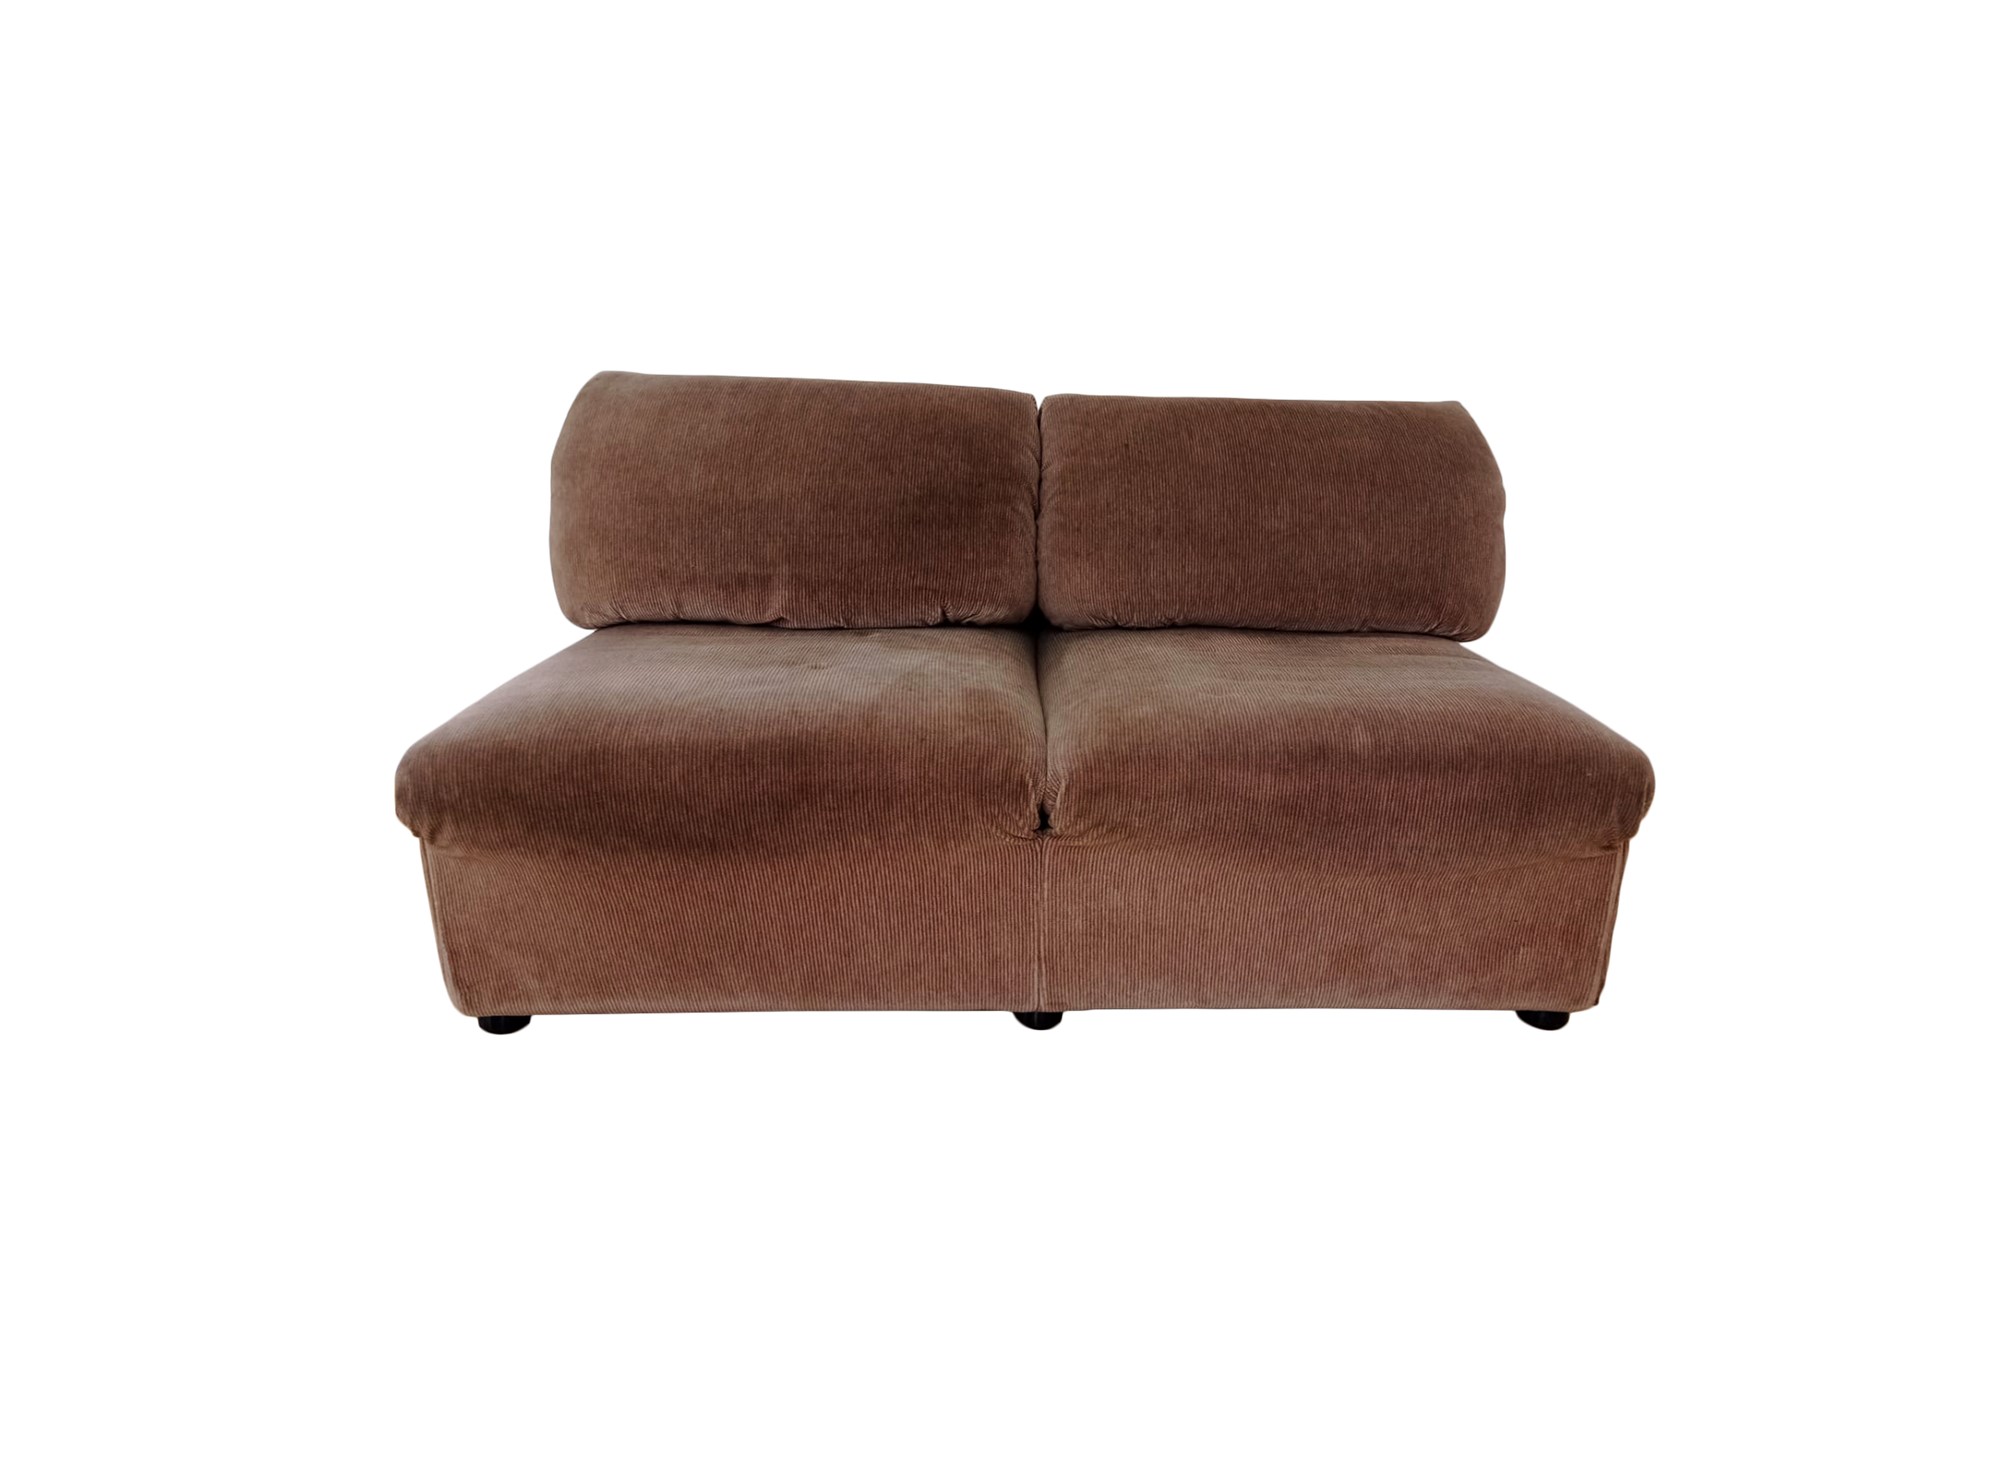 Two seater sofa - Image 2 of 3